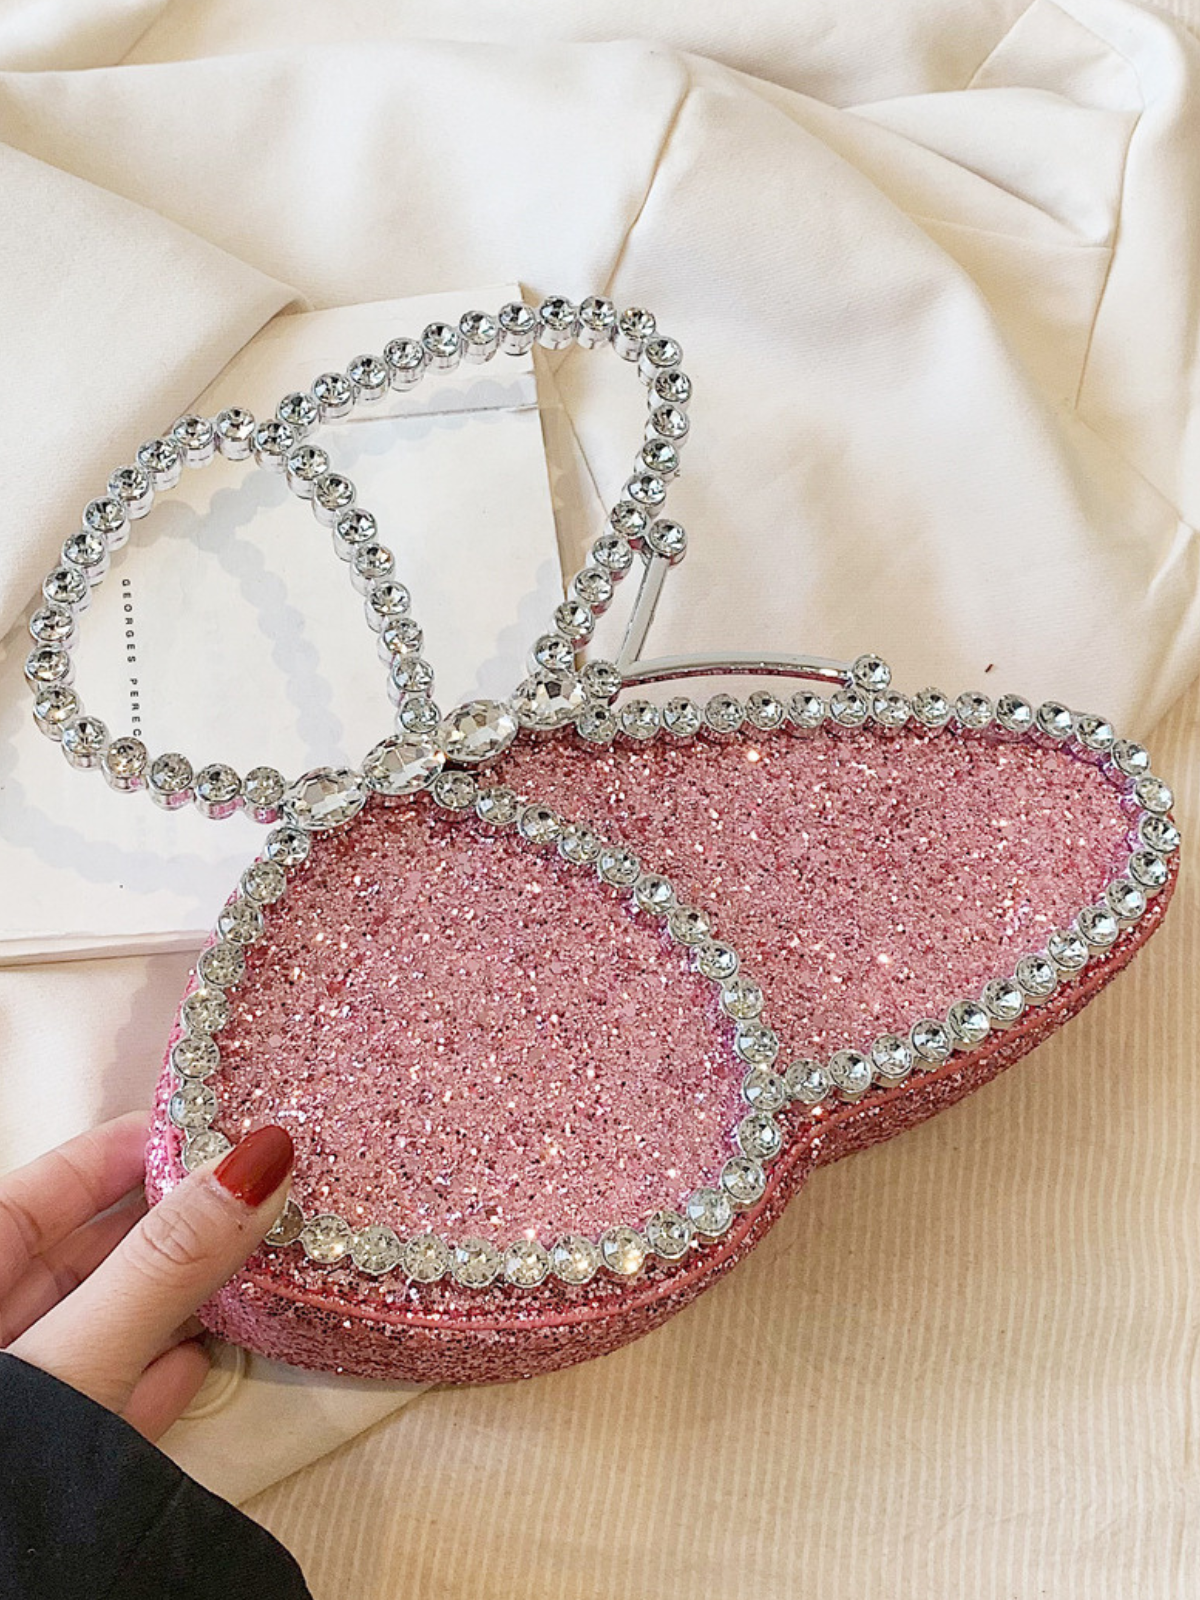 Mia Belle Girls Crystal Butterfly Clutch Bag | Girls Accessories